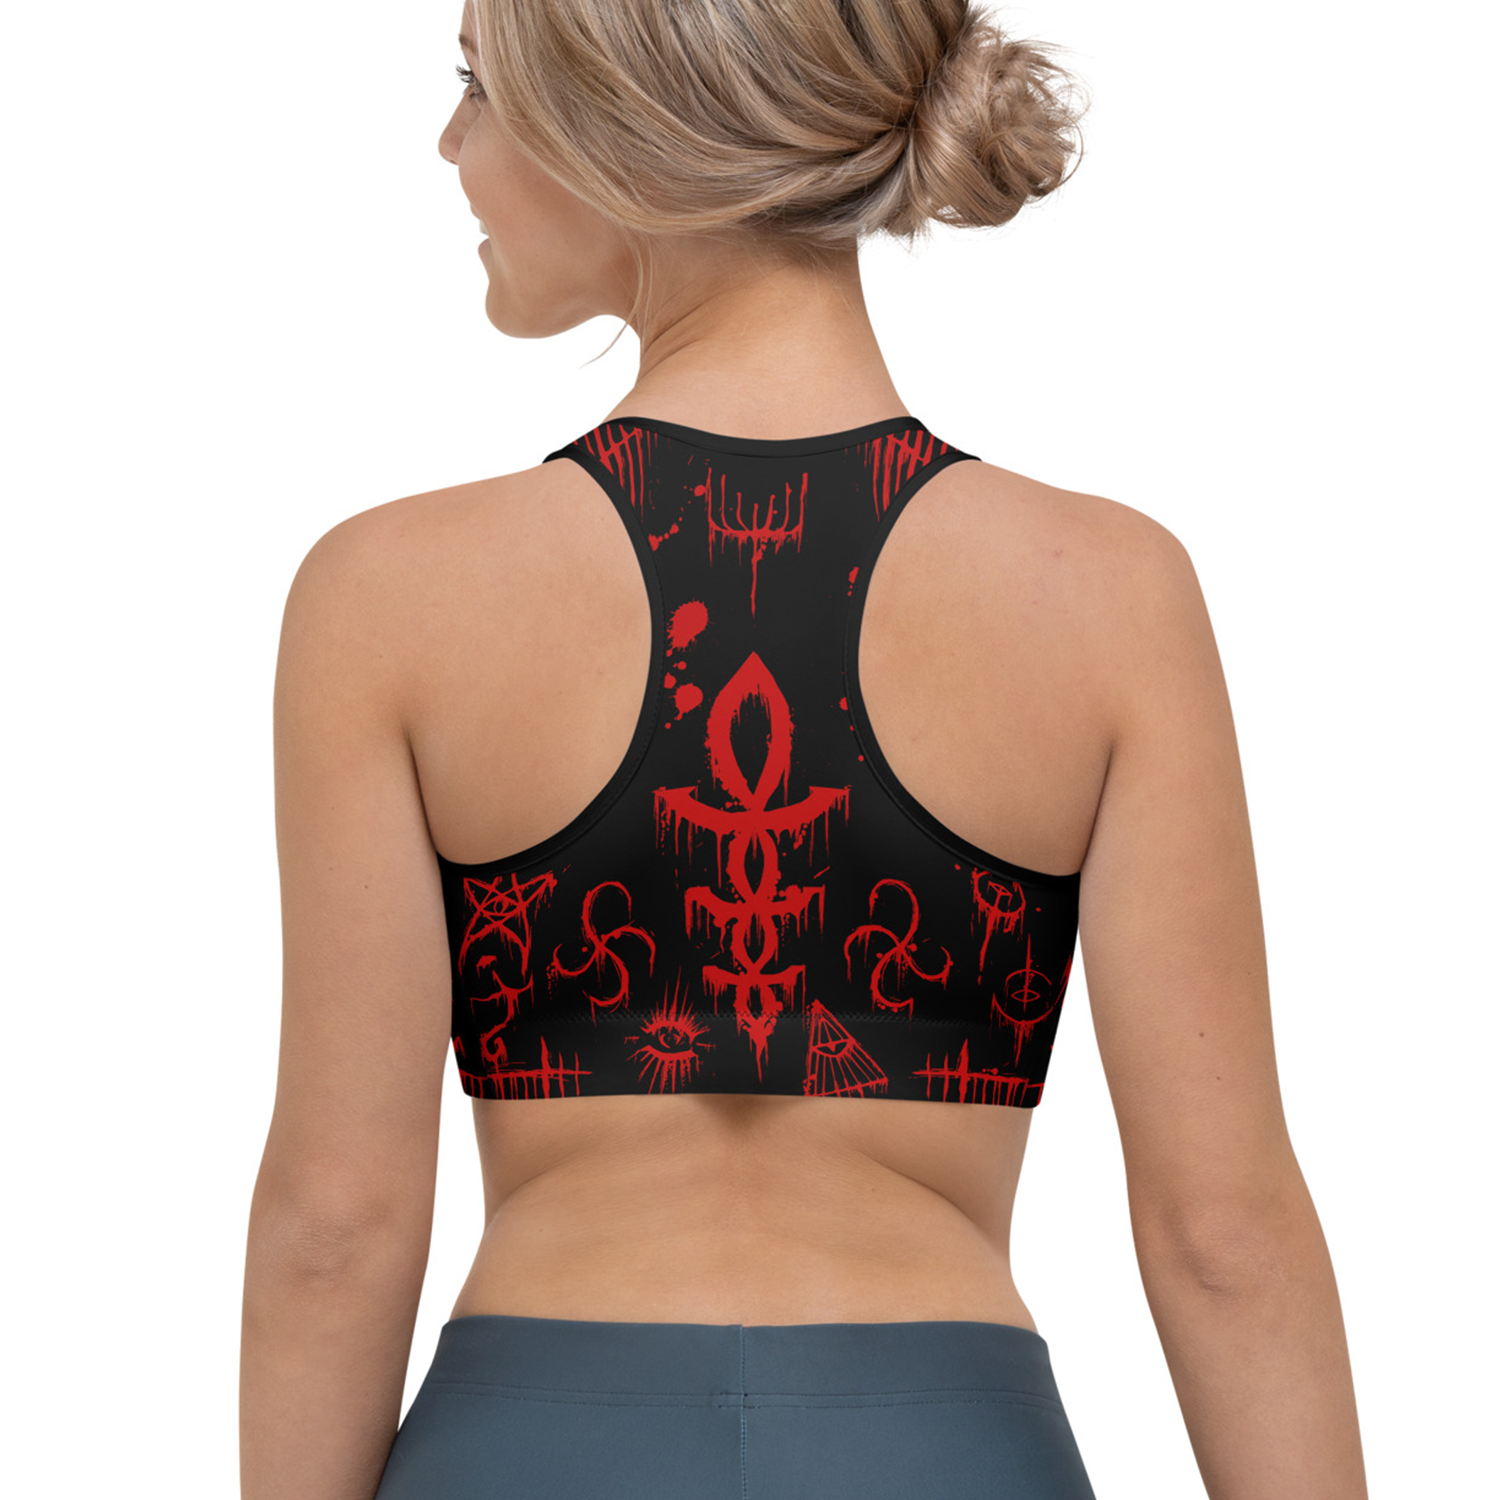 All Over Print Compression Sports Bra Moon and Star Gold on Black Pattern ,  Gym Clothes, Summer Style, Gamer Top, RPG Video Game Game Art -  Canada